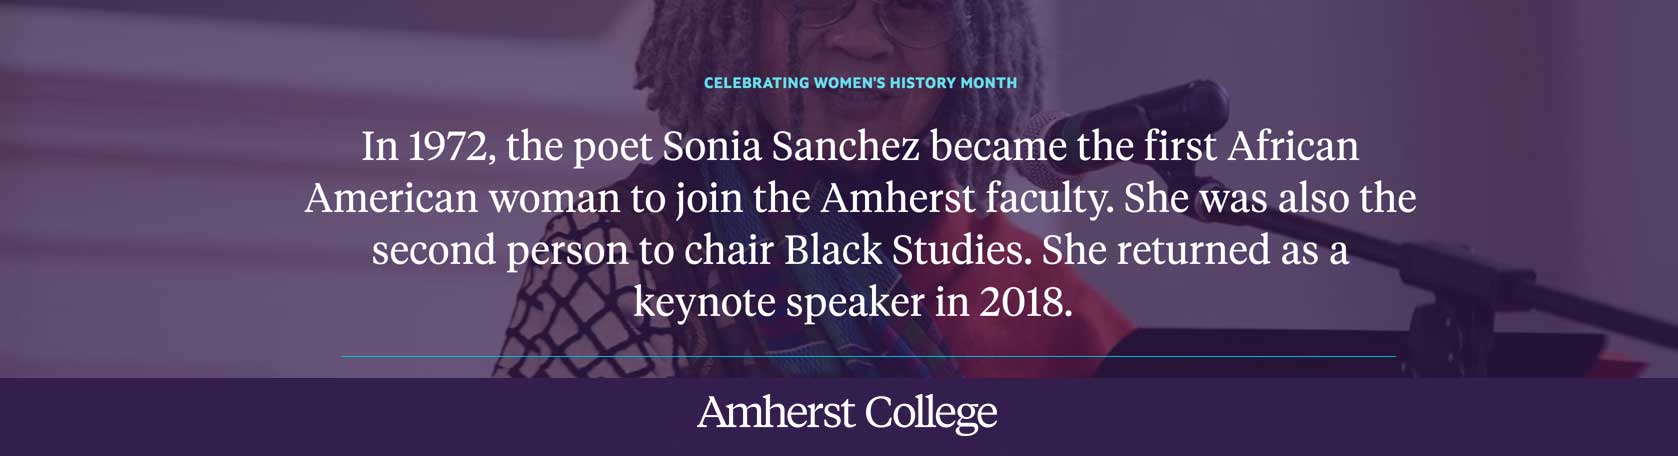 In 1972, Sonia Sanchez became the first African American woman to join the Amherst faculty